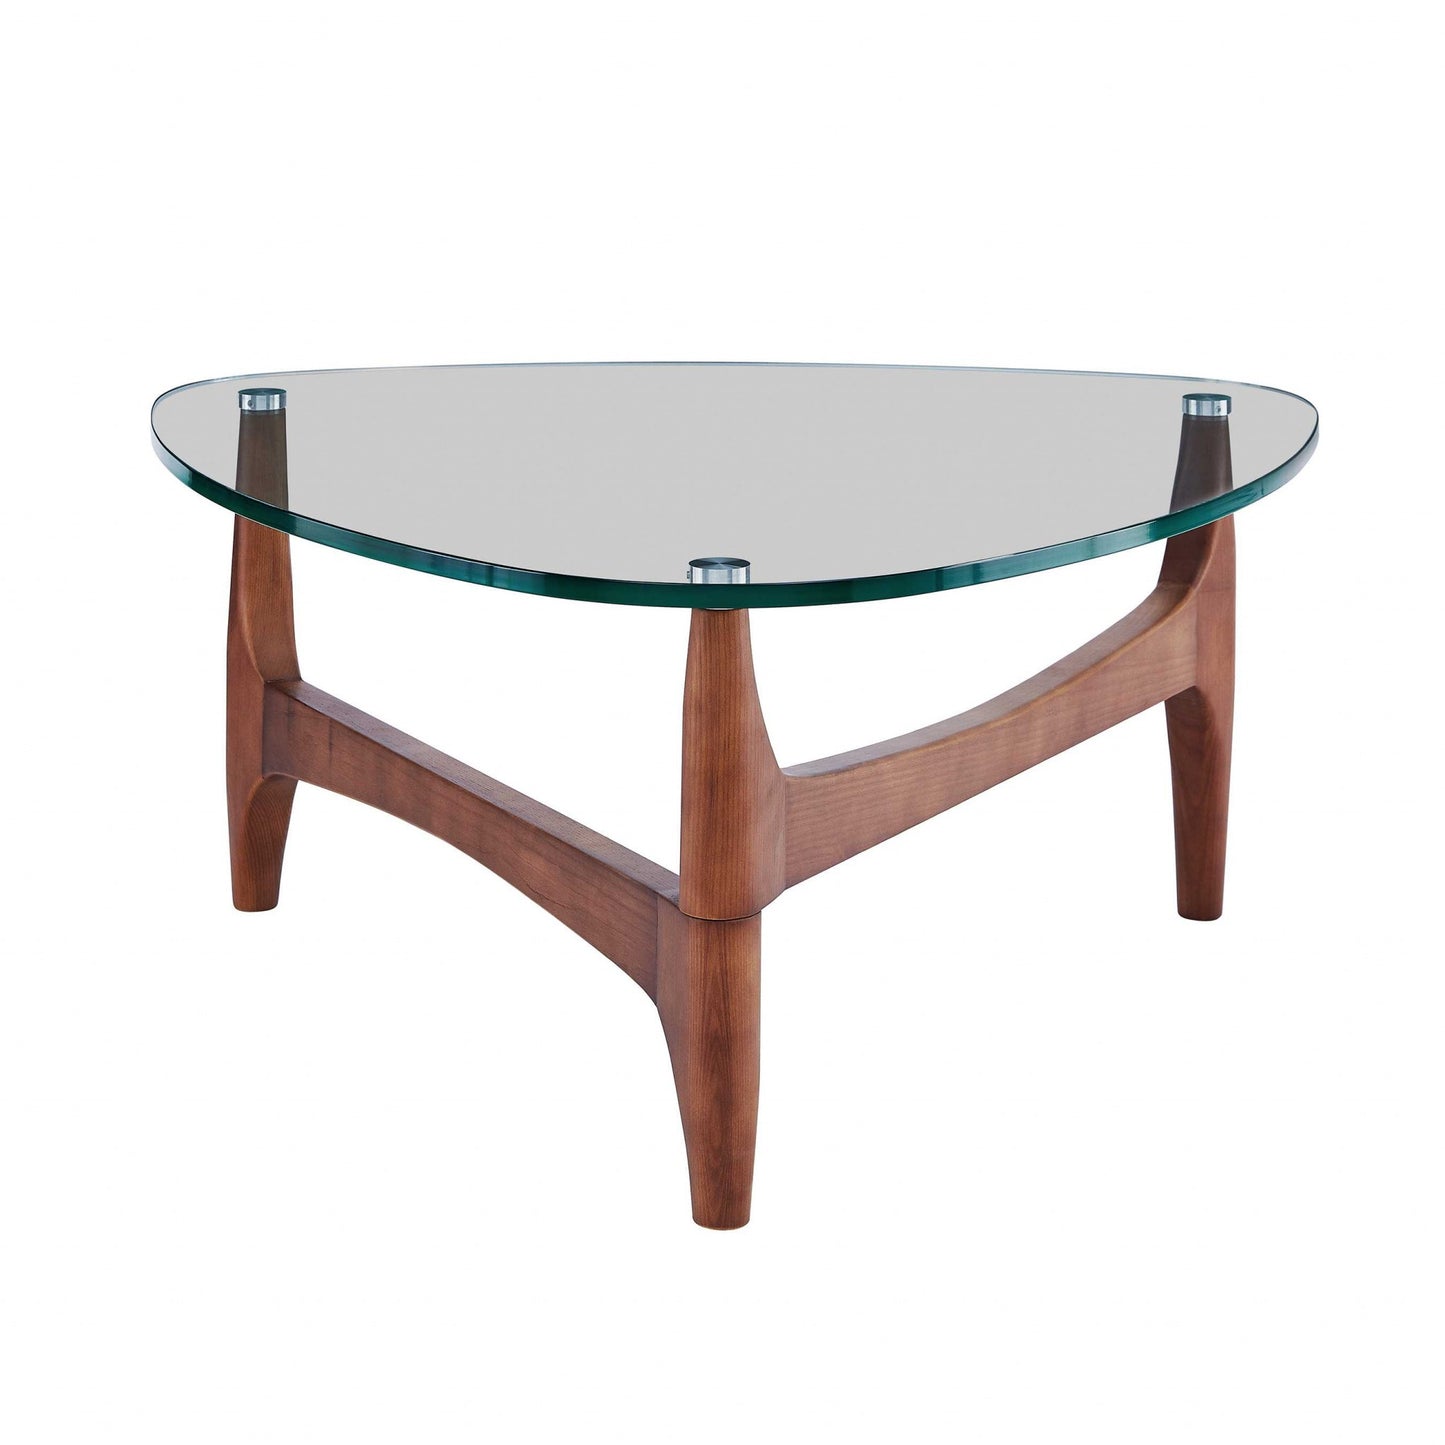 35" Walnut And Clear Glass Triangle Coffee Table